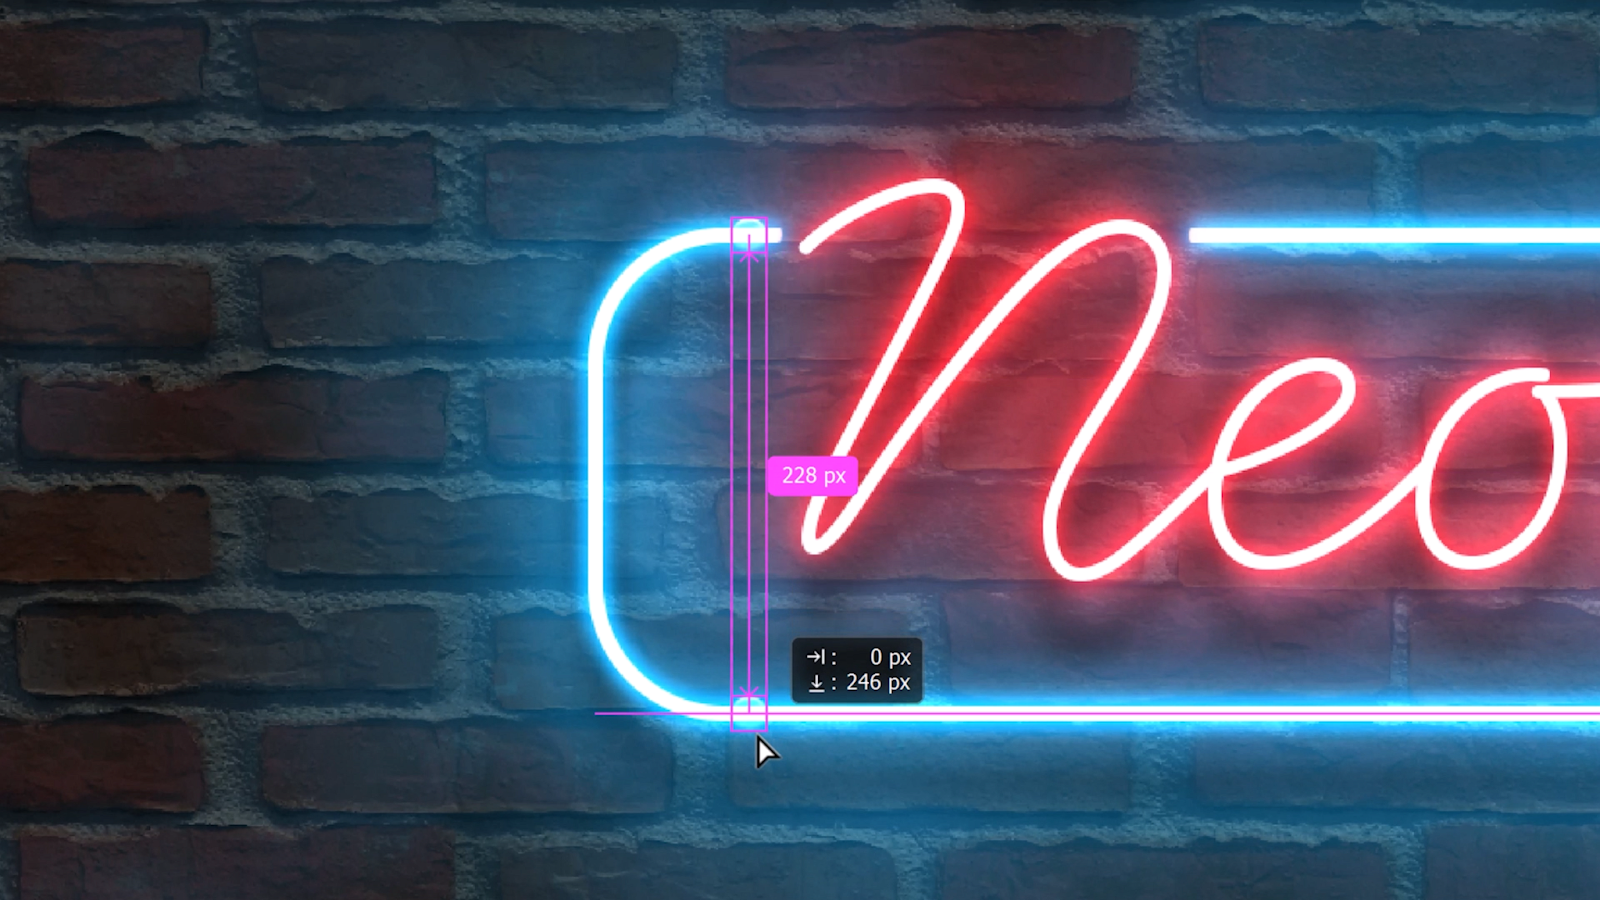 Realistic Neon Light Effect In Photoshop (Everything Explained!)